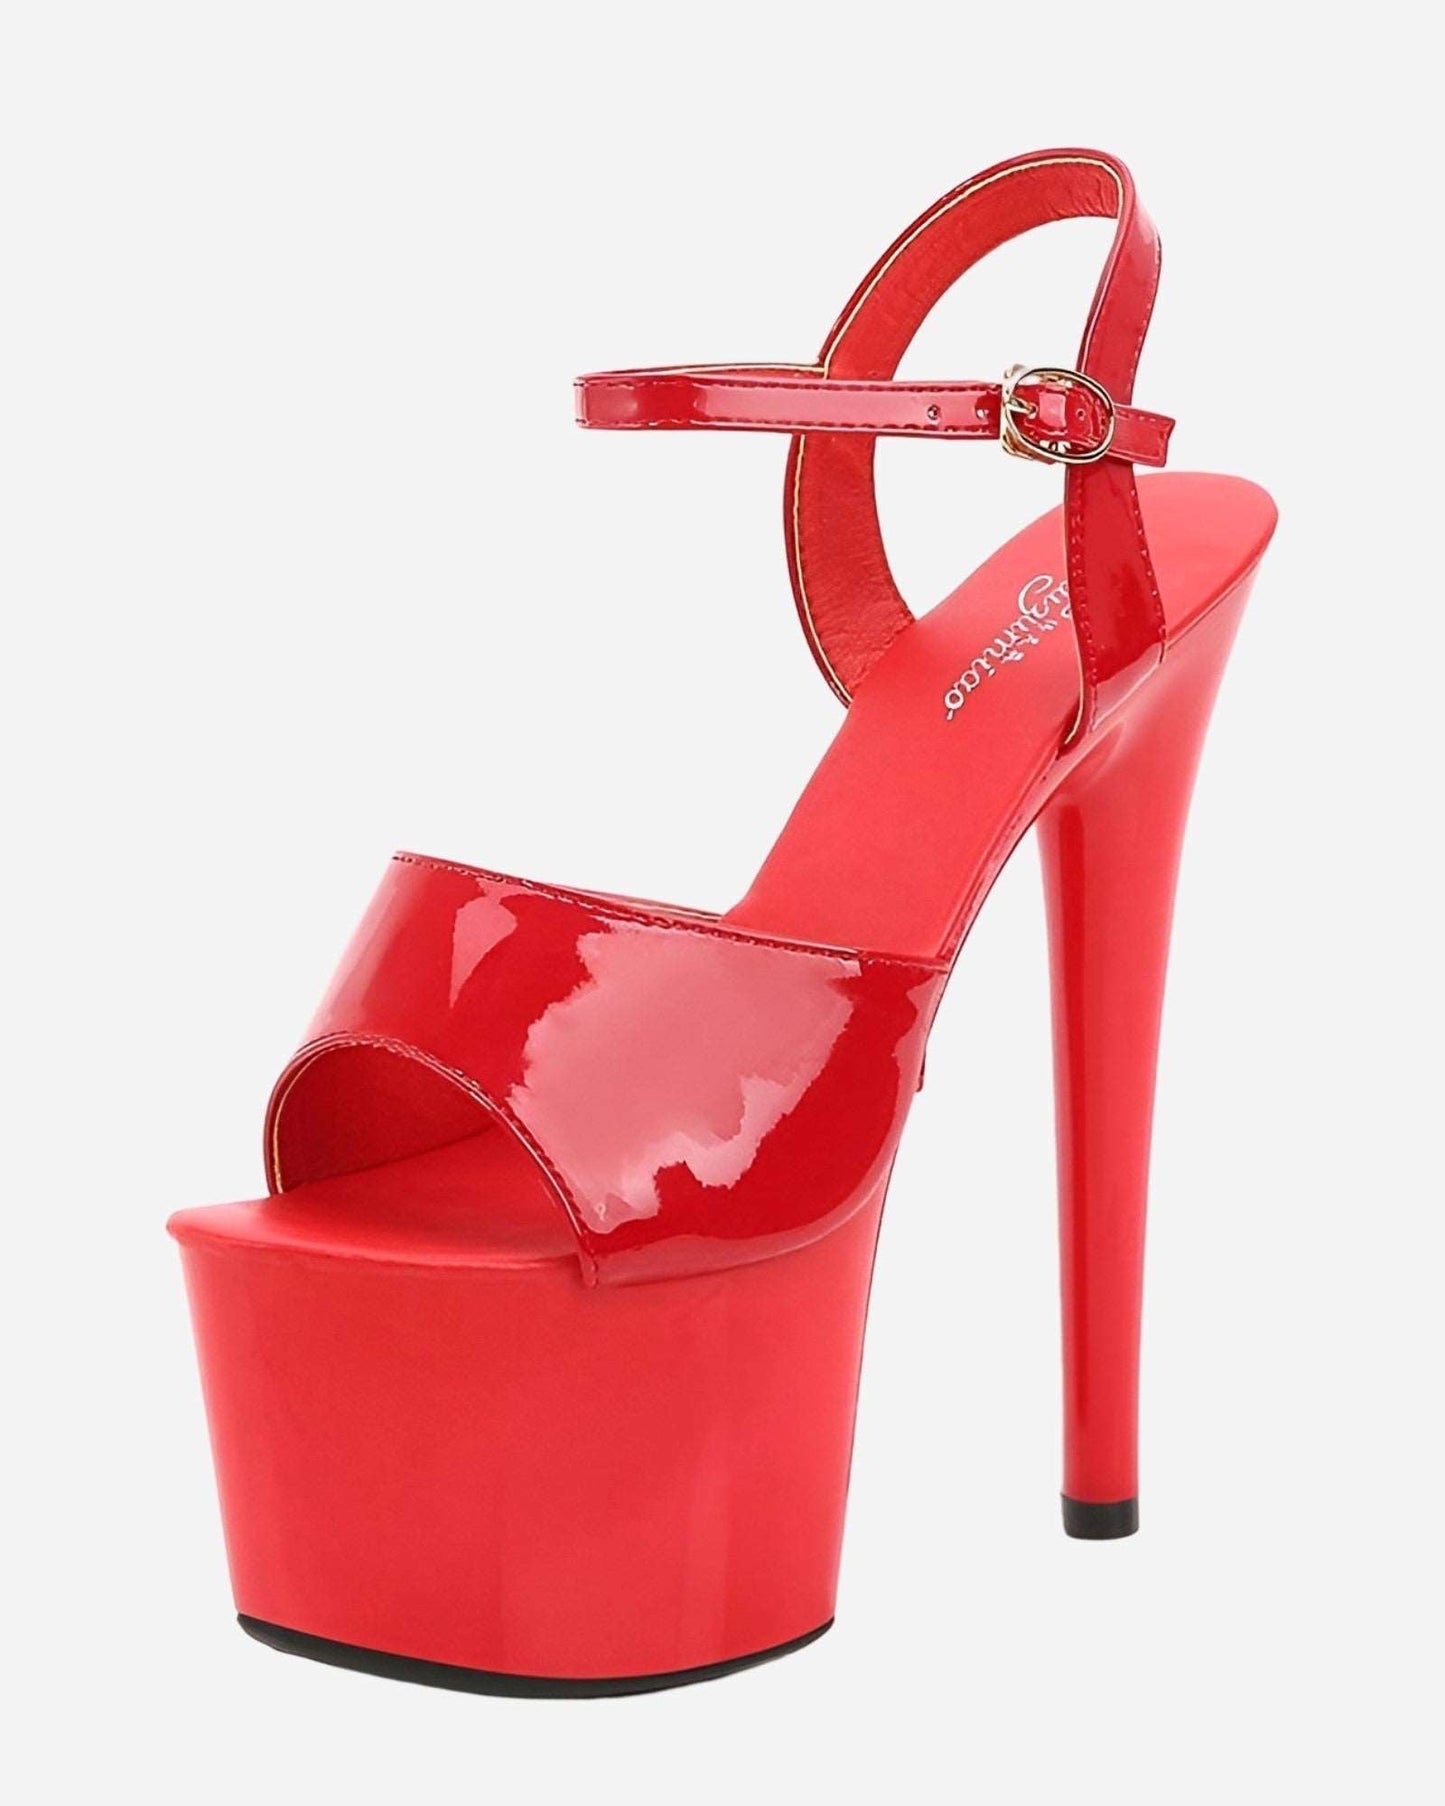 Shoes Red Classic Pole Dance High Heels